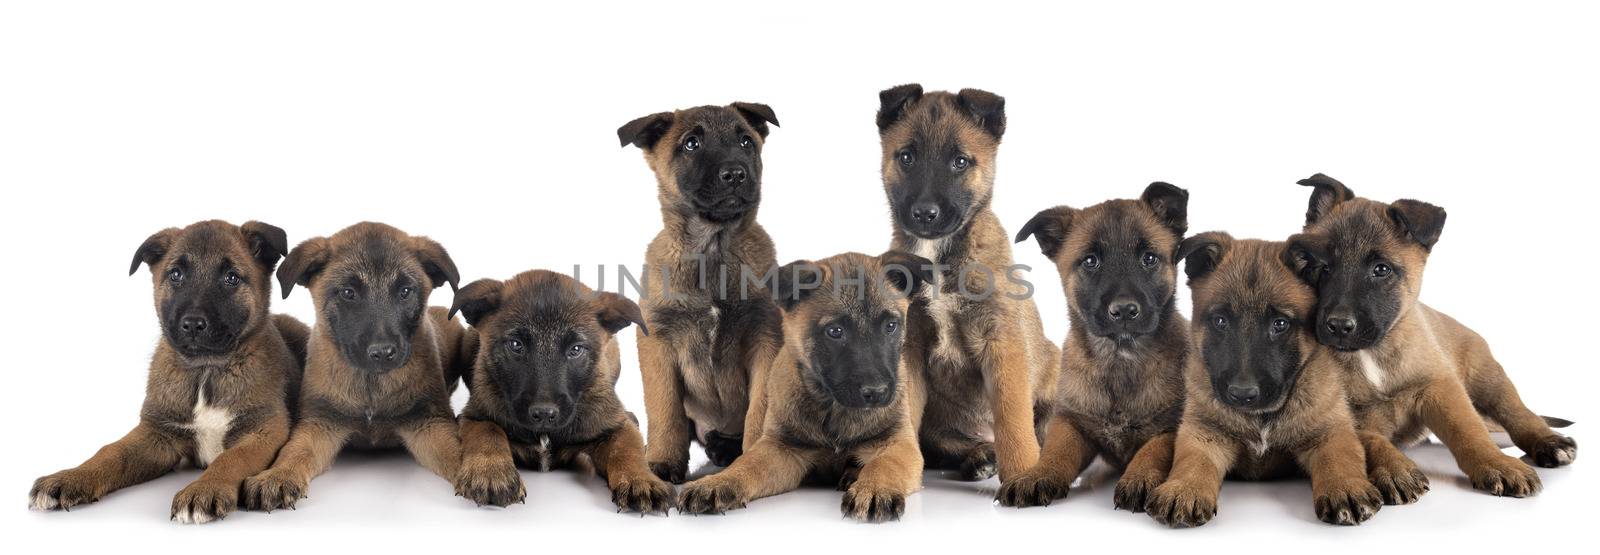 puppies malinois in studio by cynoclub